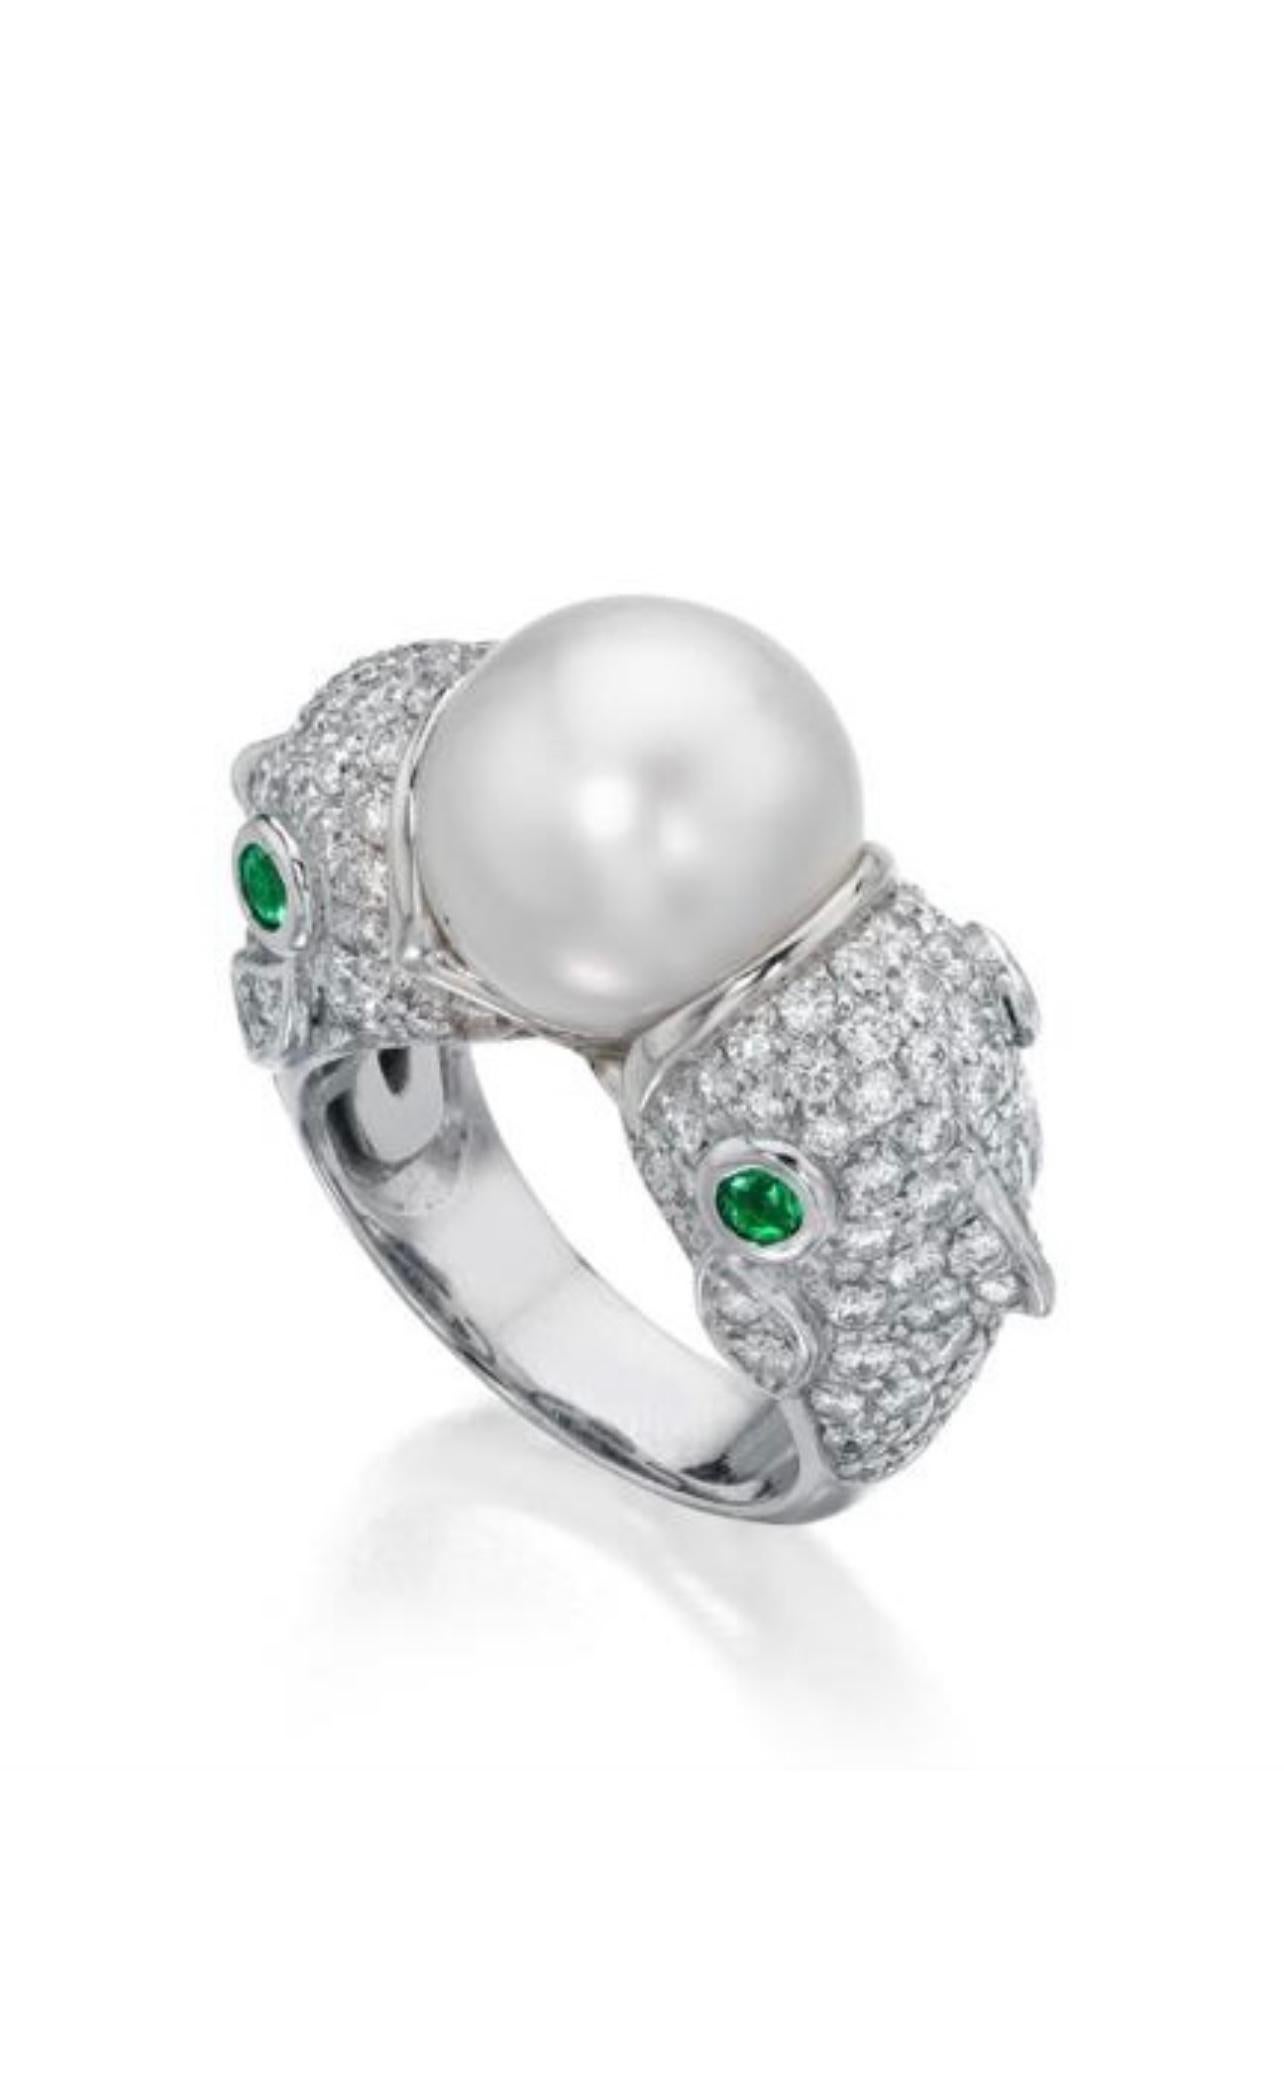 Ella Gafter South Sea Pearl Diamond And Emerald zodiac pisces ring beautifully handcrafted in 18k white gold. 
The details are as follows: 
Pearl: 14mm untreated south sea pearl. The pearl displays its natural color and hasn't been enhanced in any